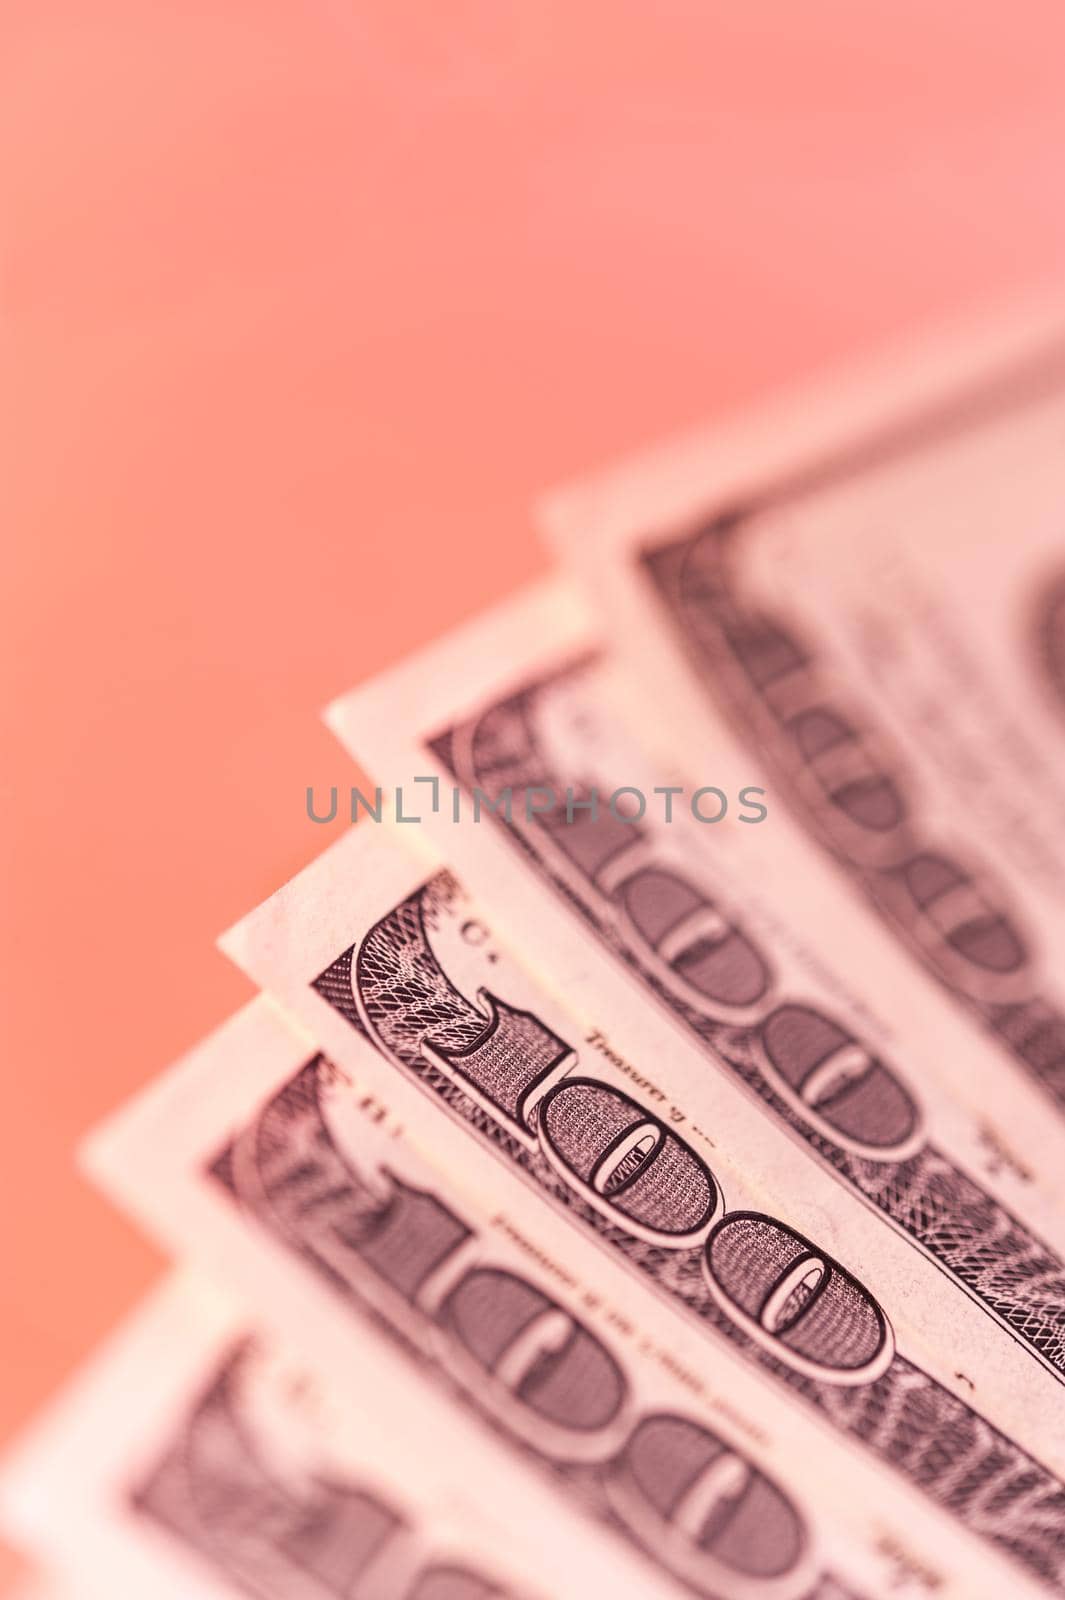 Closeup view of cash money dollars bills on a pink background. Finance and business theme. by bashta